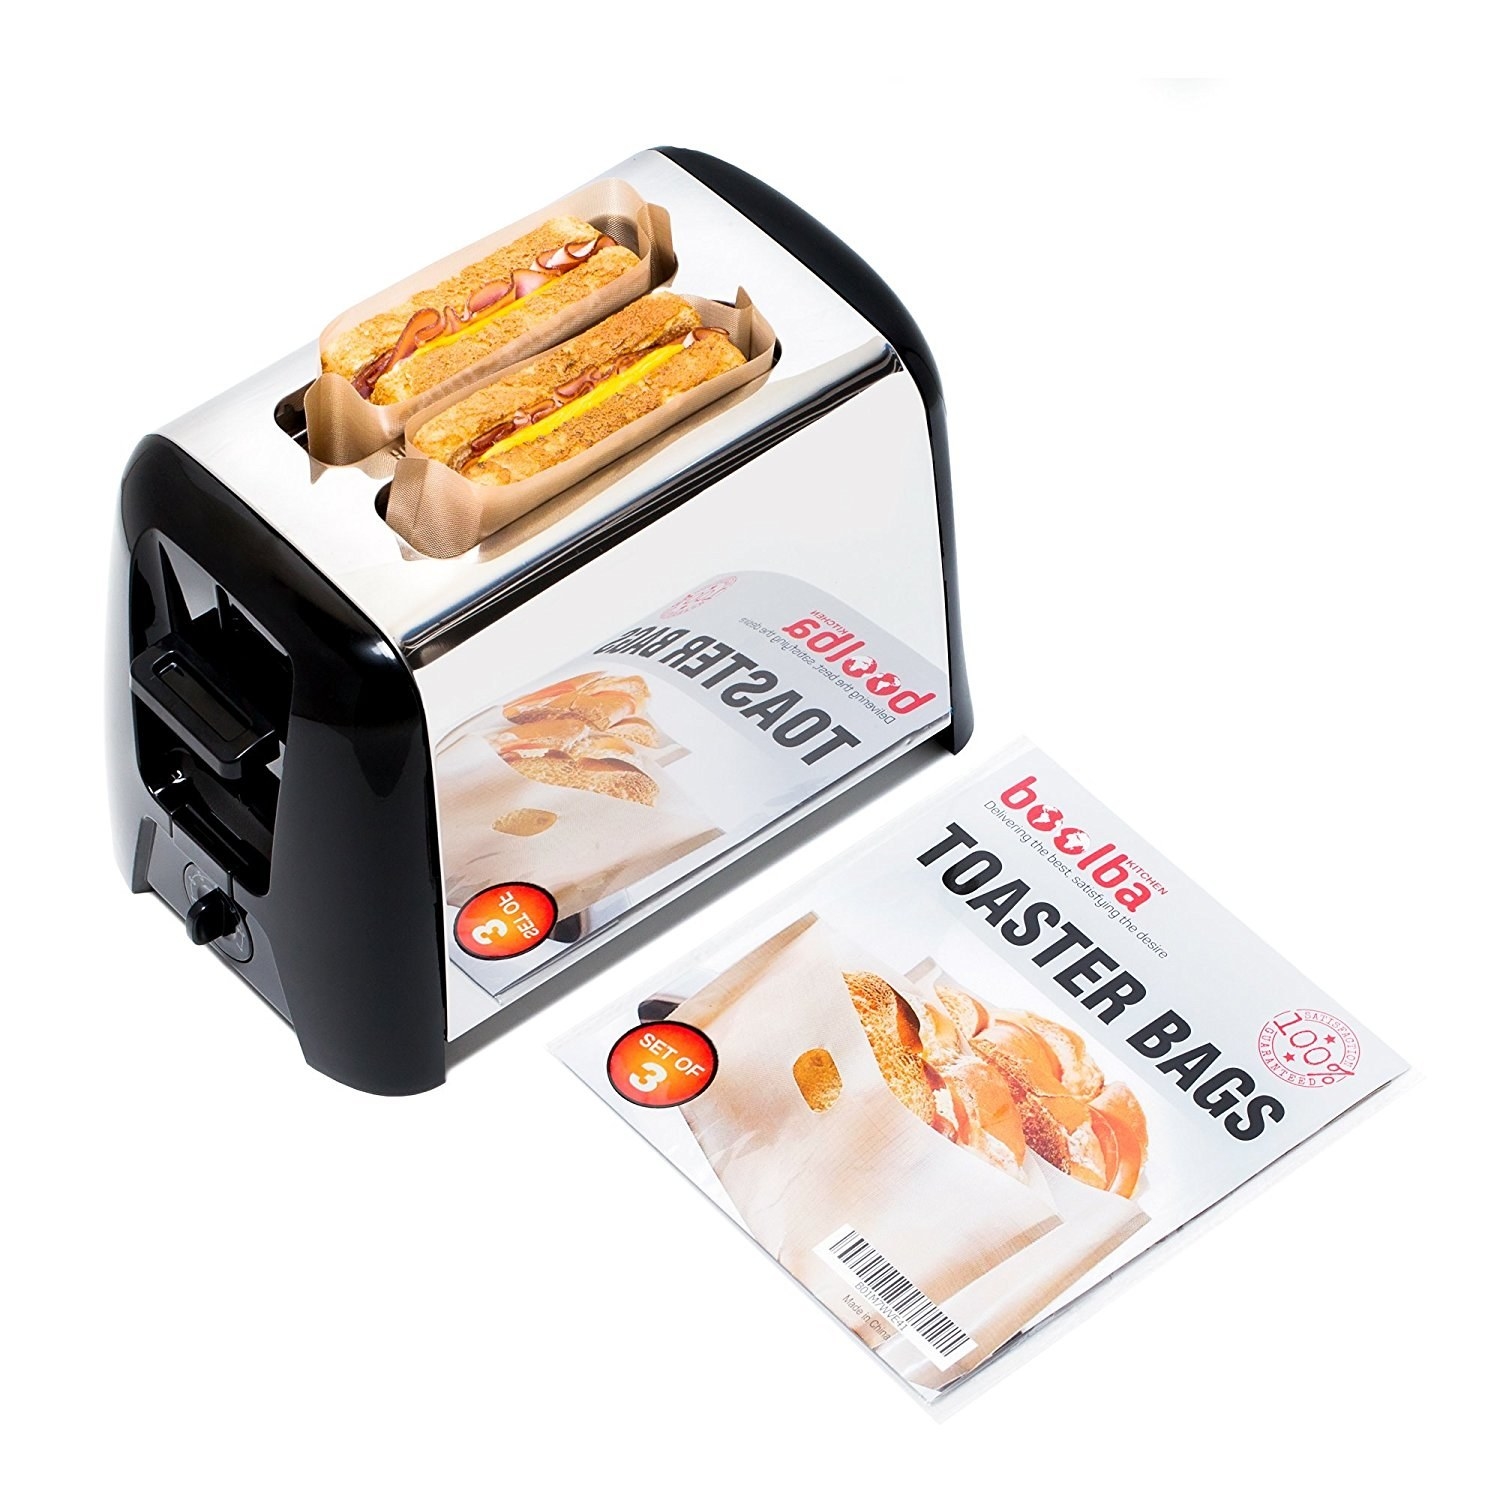 grilled cheeses in bags in a toaster